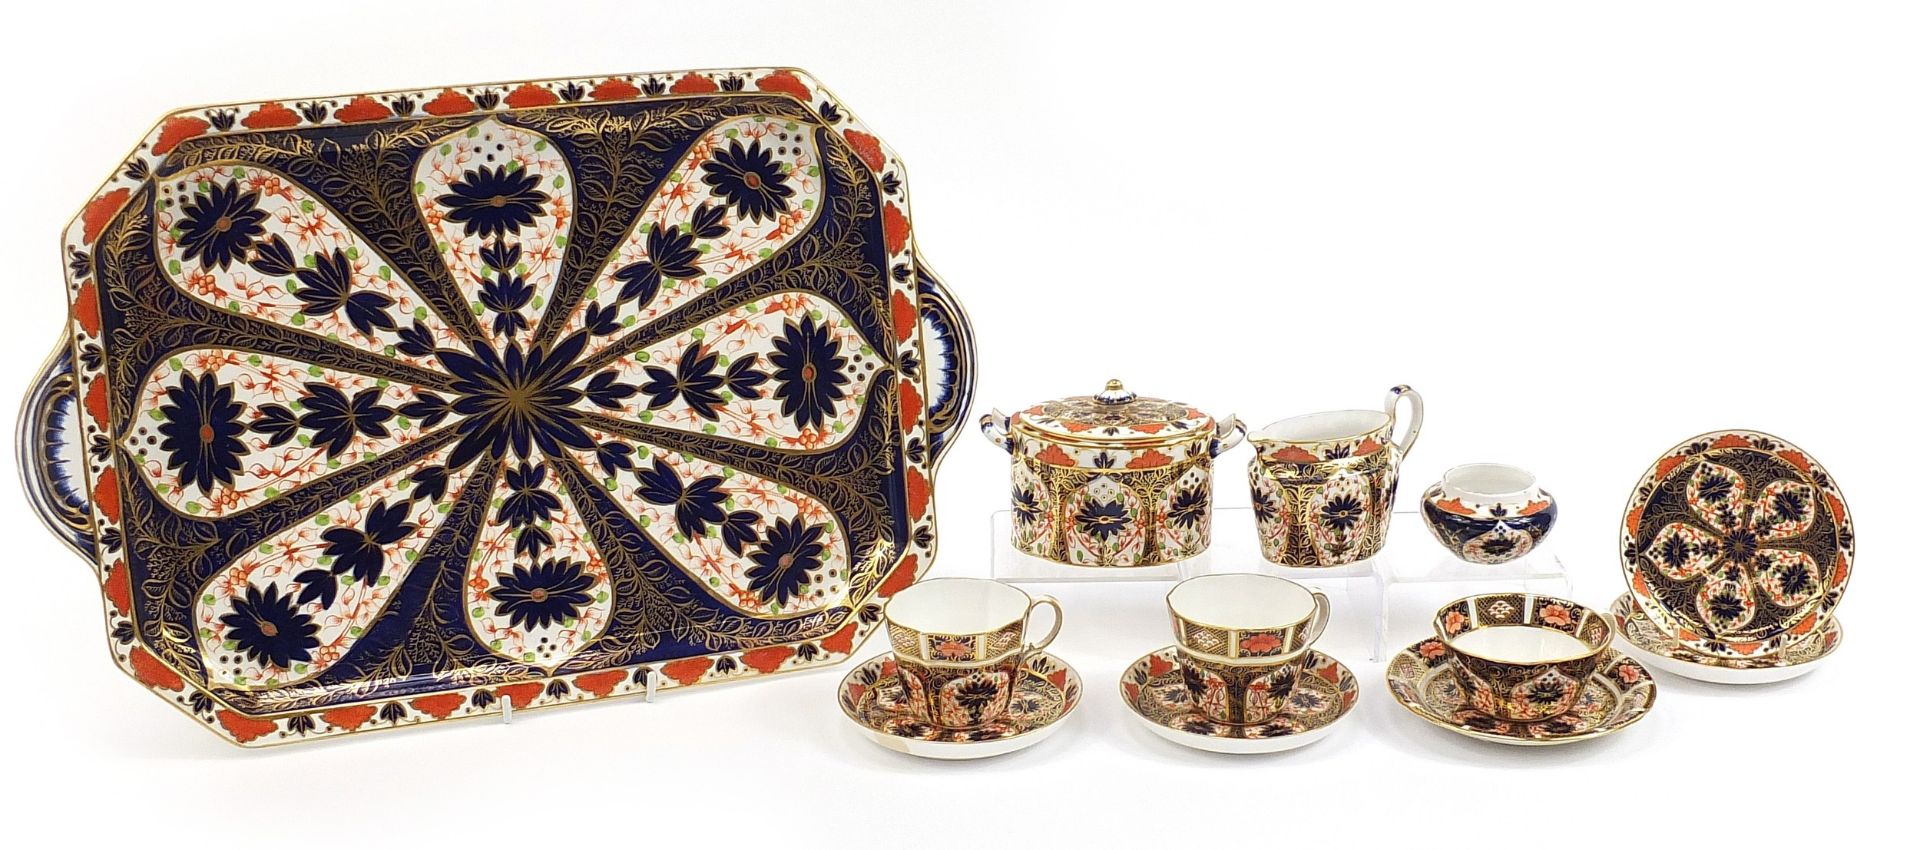 Royal Crown Derby Imari pattern teaware including a twin handled tray, sugar bowl with cover and